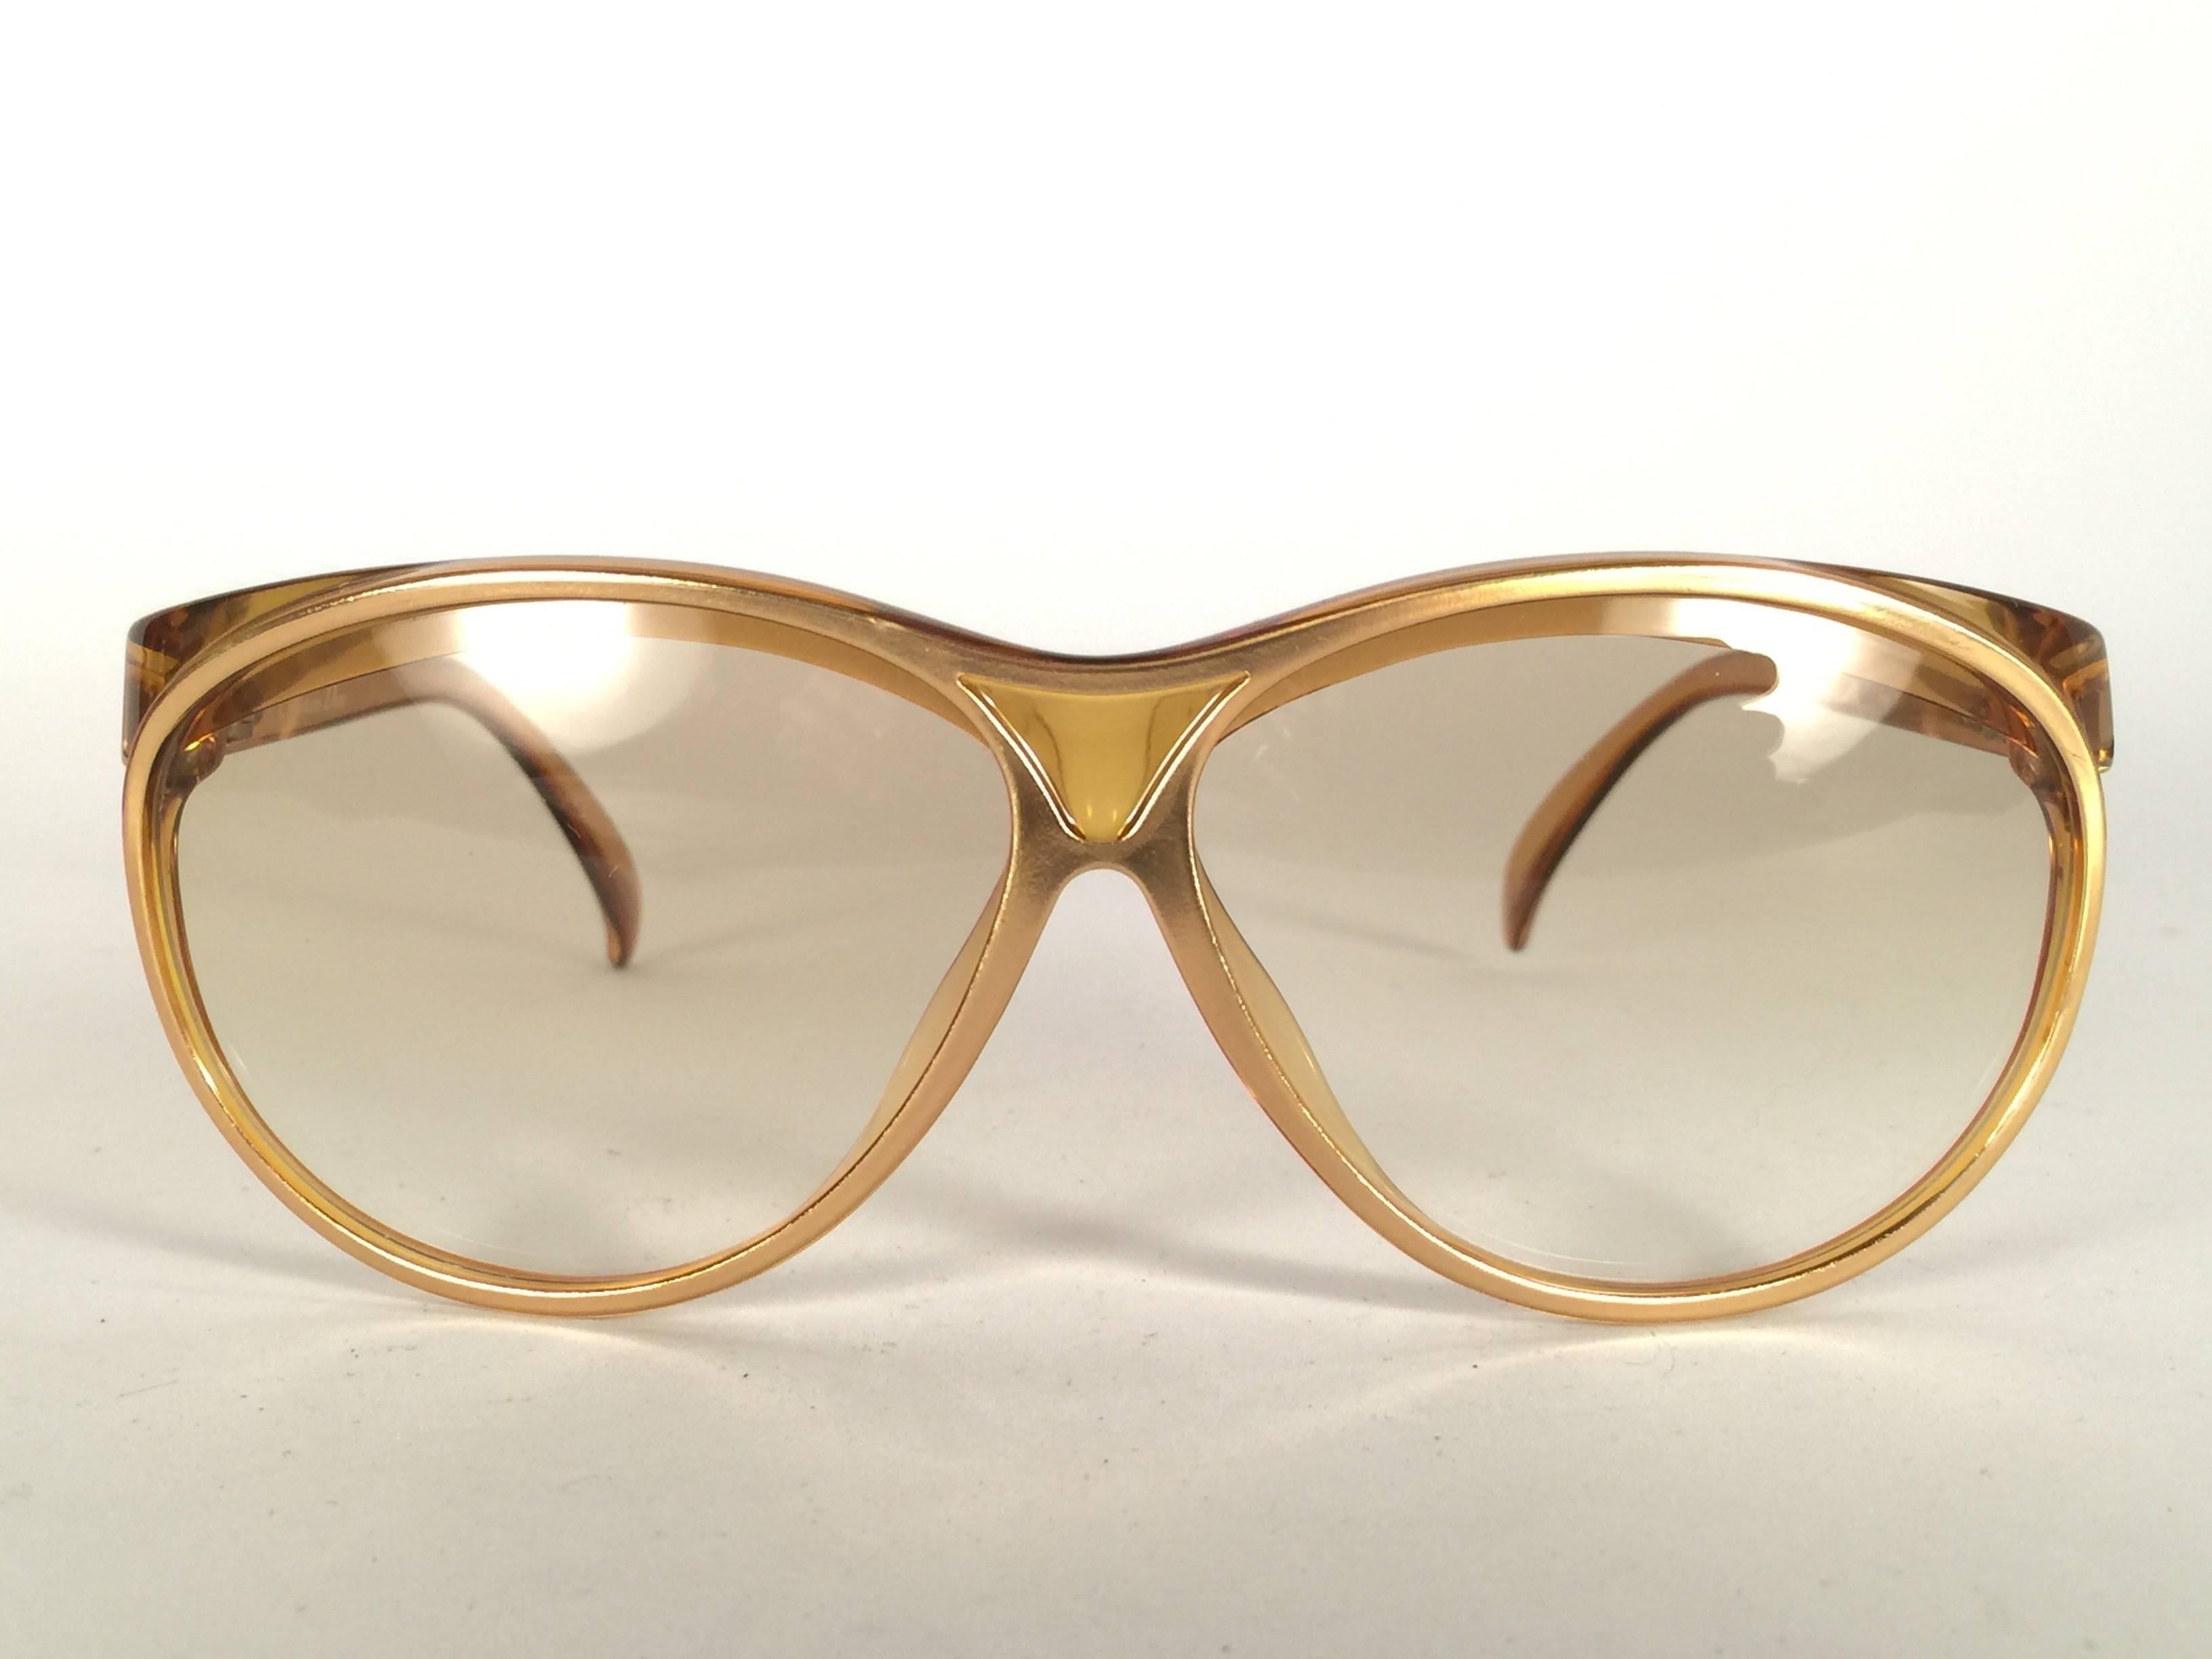 New Vintage Christian Dior 2157 Translucent Oversized frame with spotless light  gradient lenses. 

Made in Austria.
 
Produced and design in 1970's.

New, never worn or displayed. Comes with its original silver Christian Dior Lunettes sleeve.
